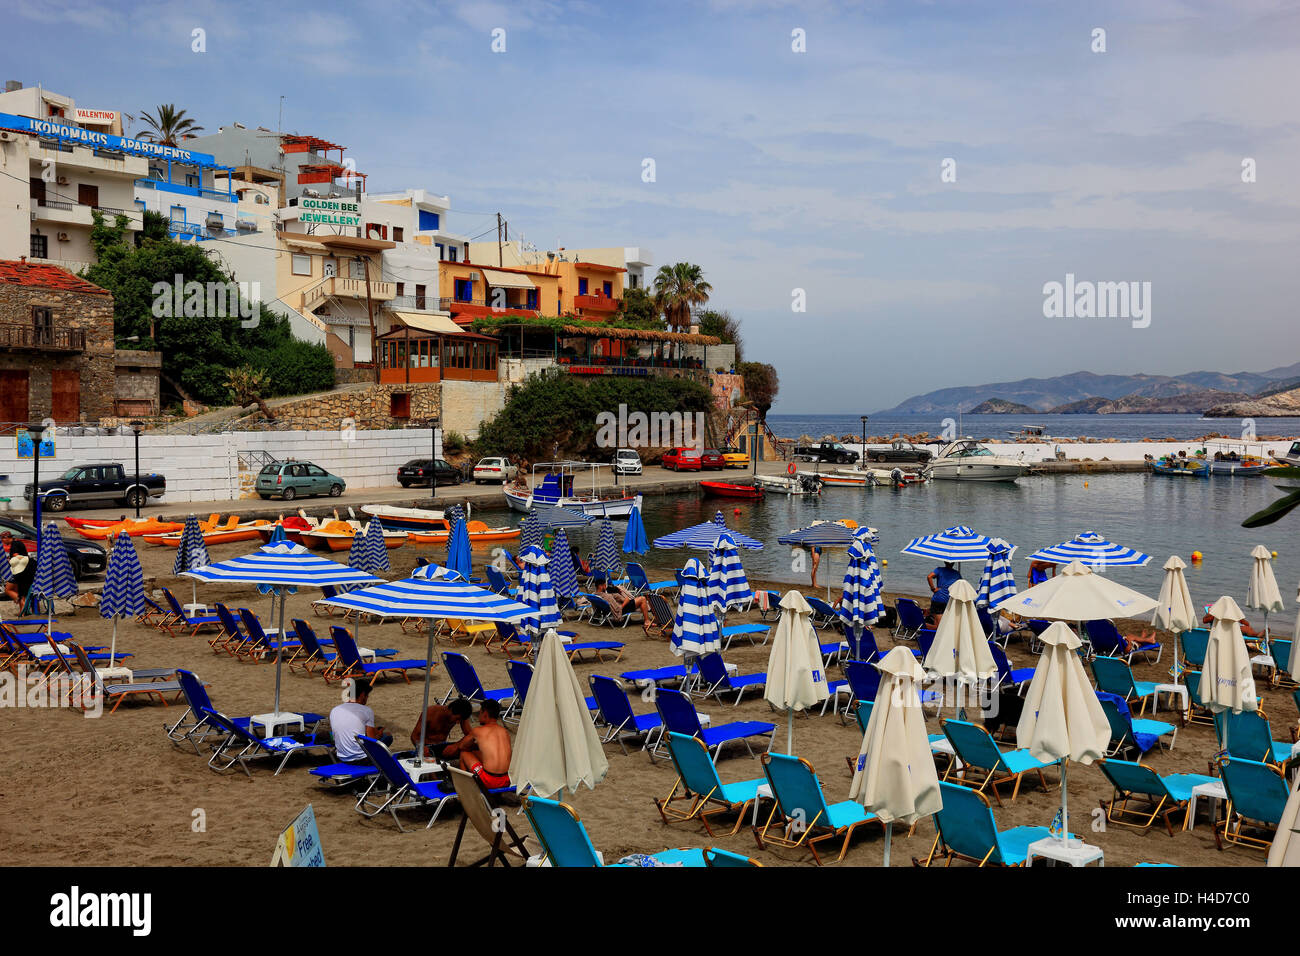 Crete, Bali on the north coast, view at the place with beach and harbour Stock Photo